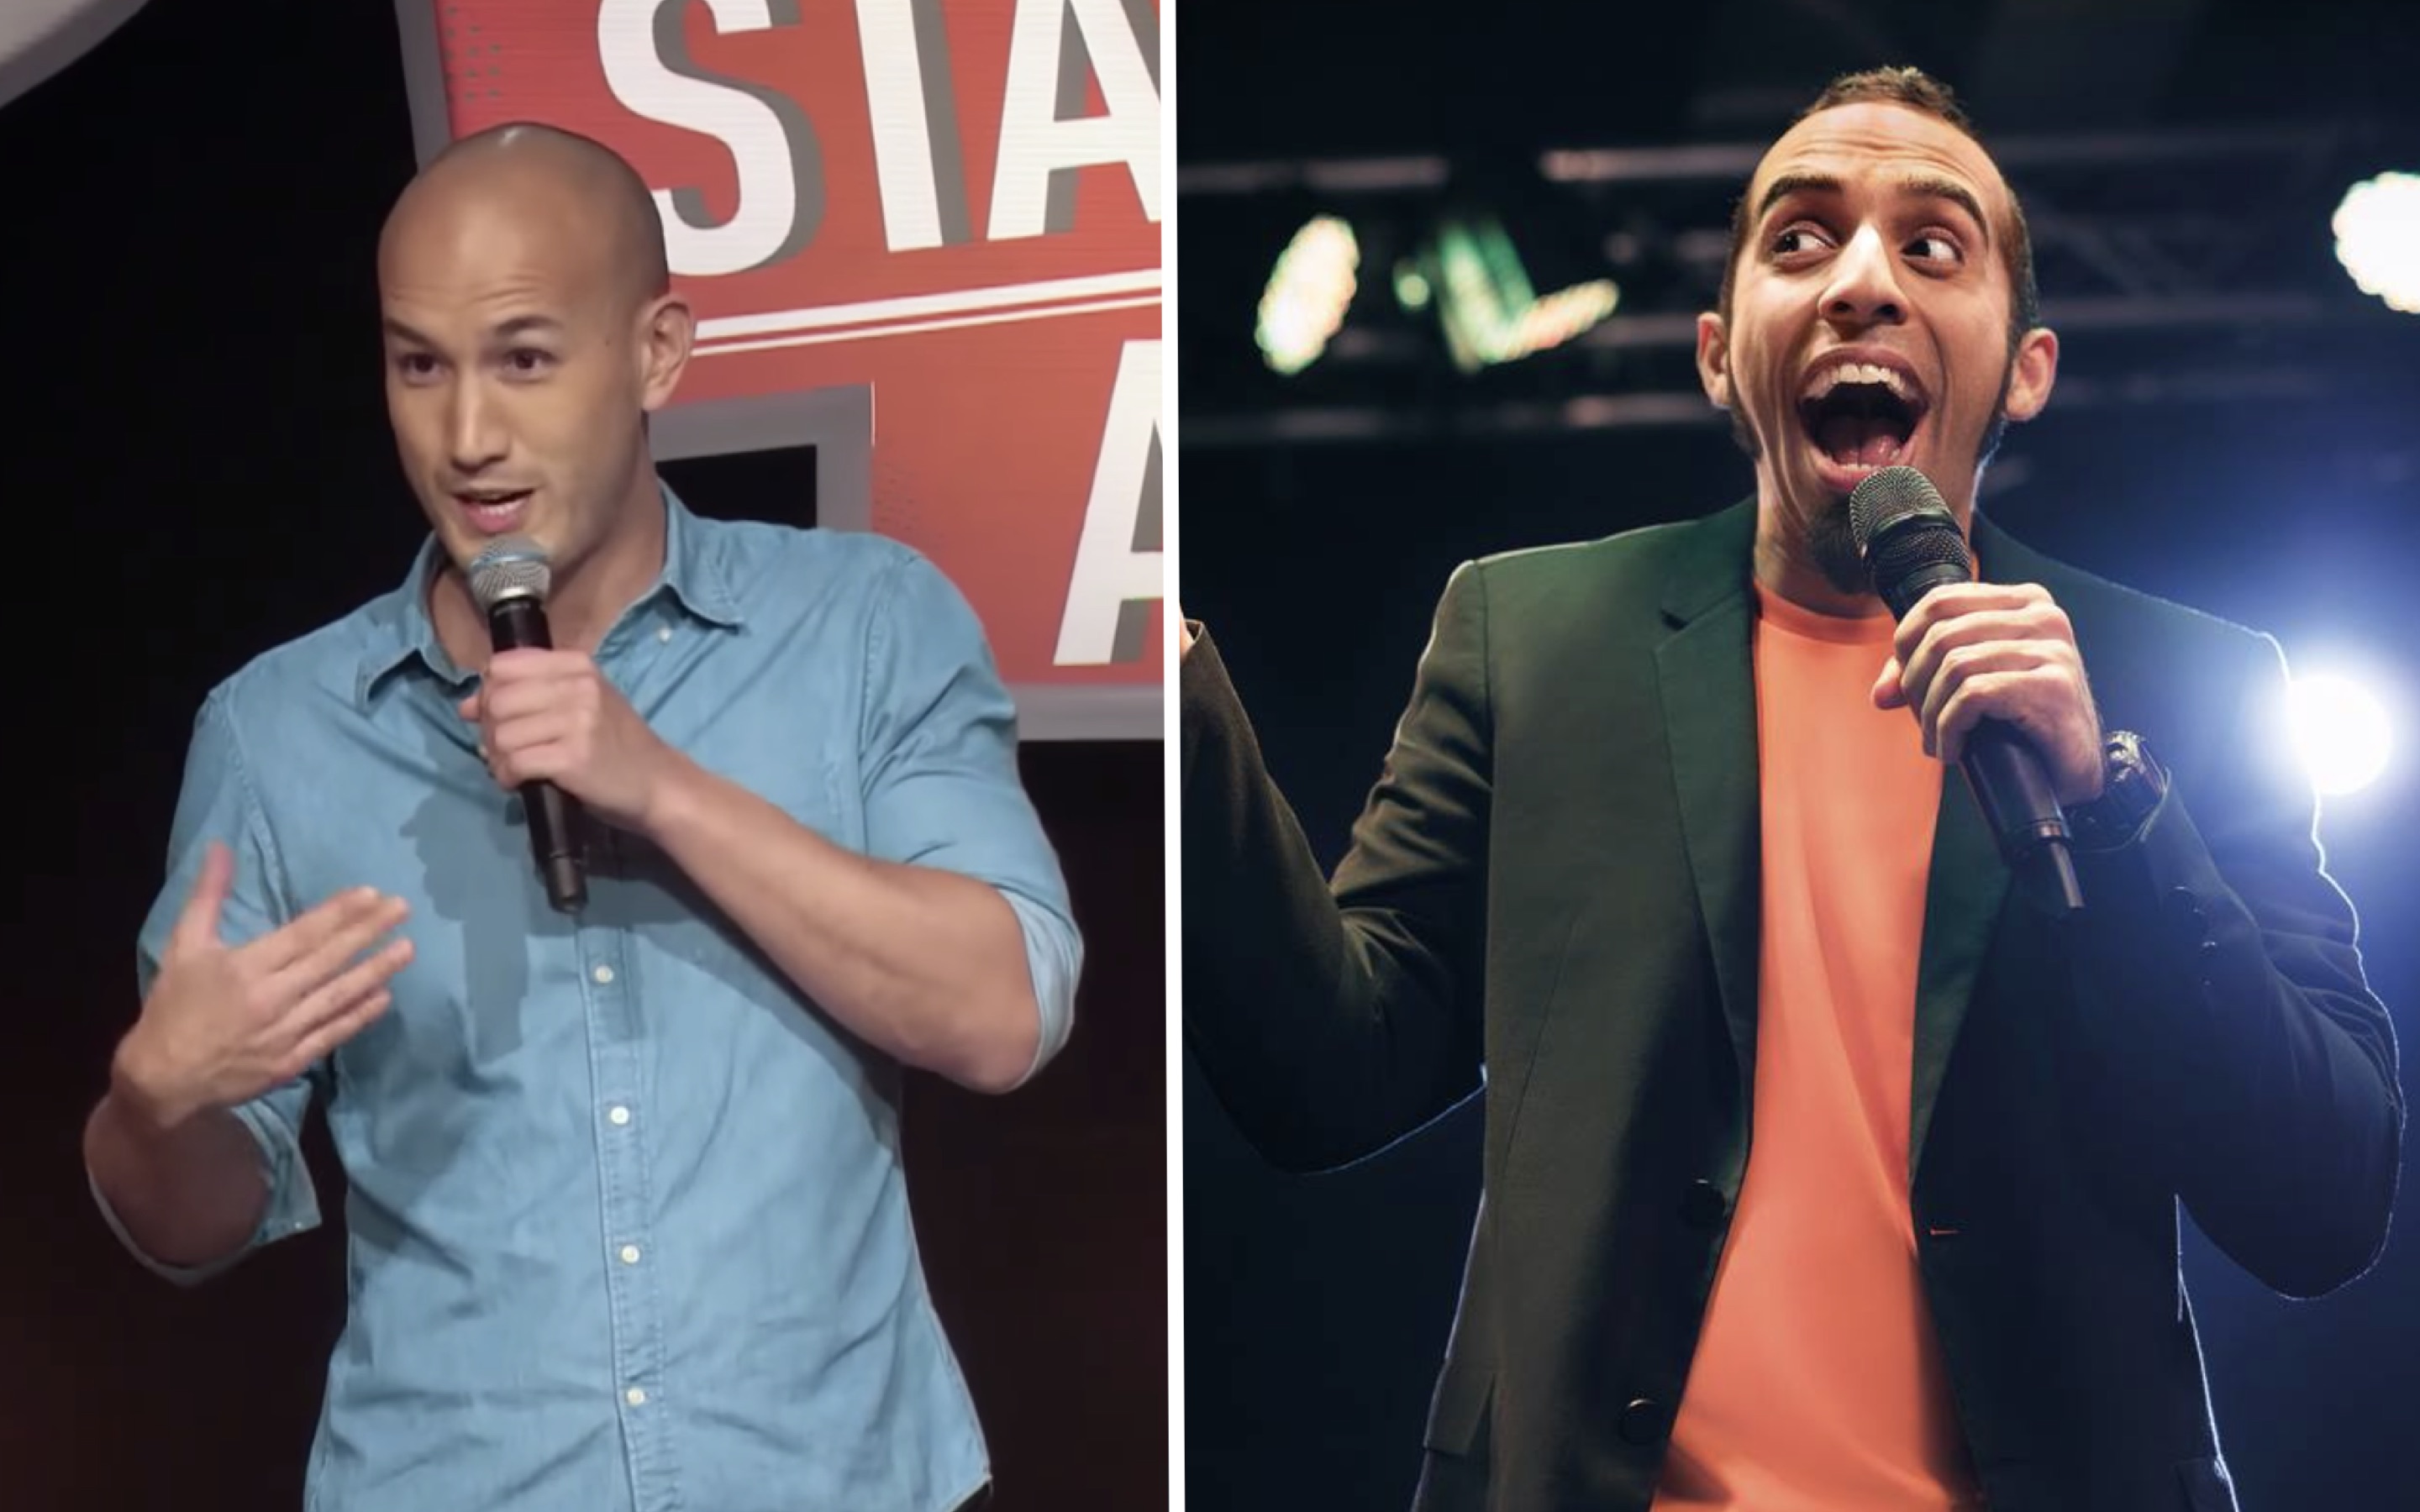 Need to fill that Trevor Noah-shaped hole in your heart? Don’t worry, Hong Kong-based comedians Ben Quinlan and Vivek Mahbubani will be here this weekend to tickle some funny bones. Screengrab and Photos via YouTube and Facebook.